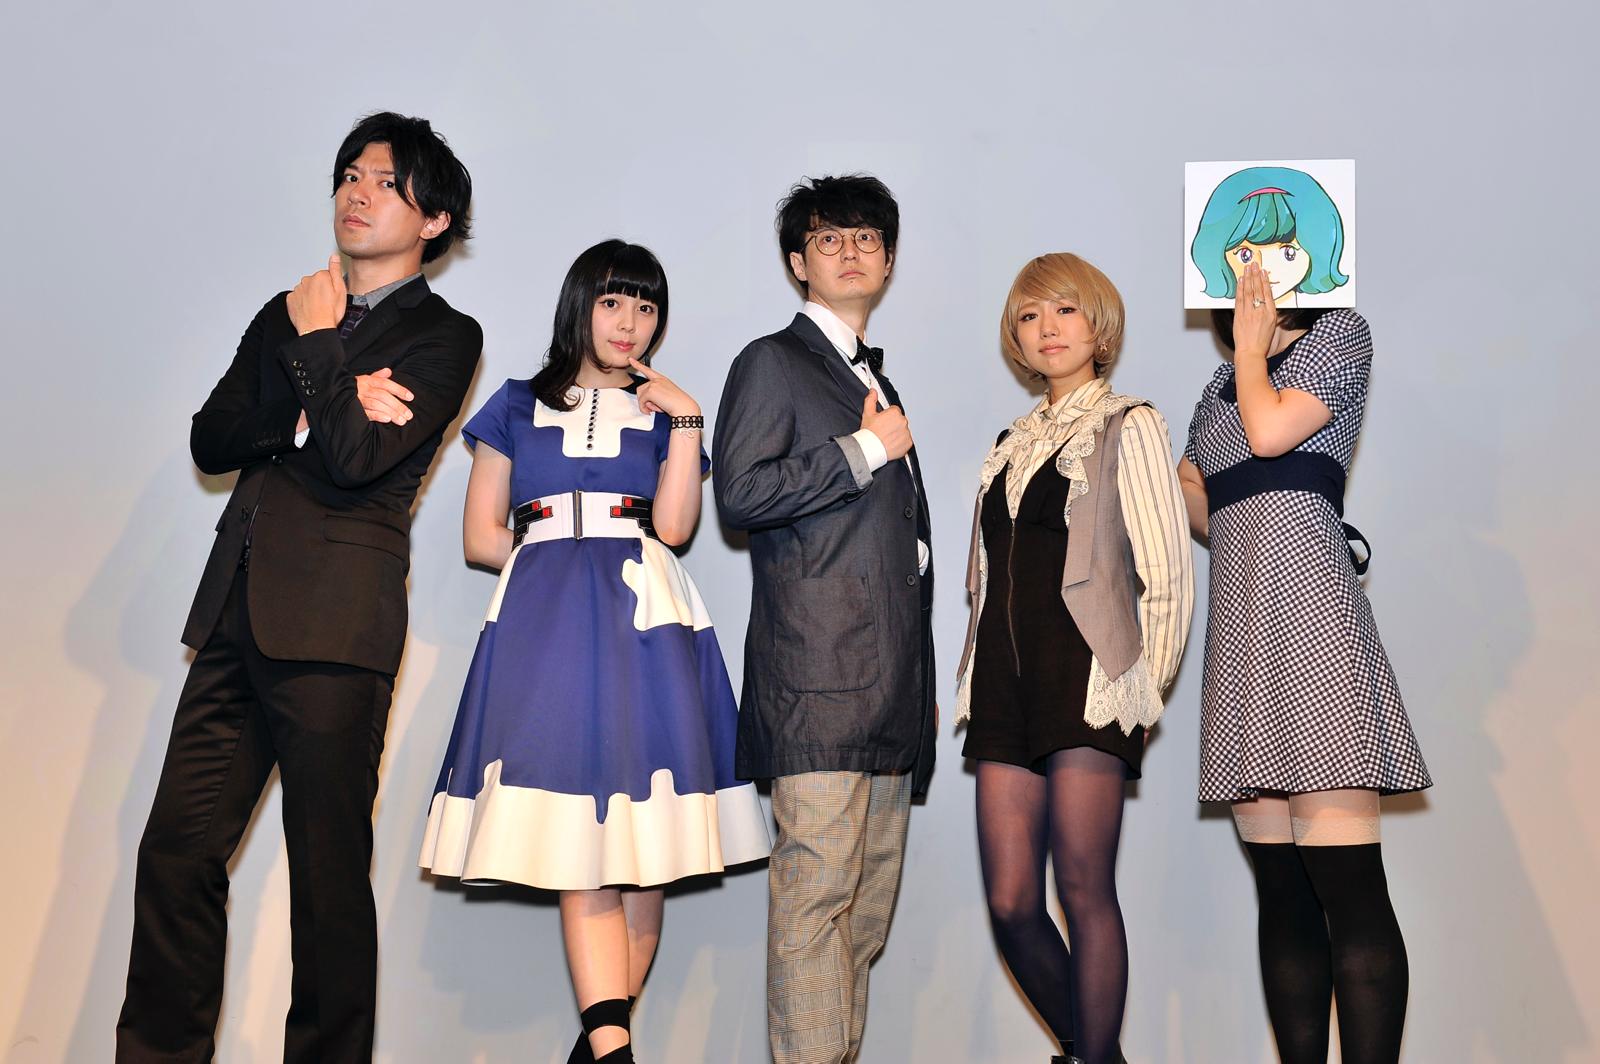 LIVE REPORT: xxx of WONDER Holds Talk & Concert Event at 2.5D!